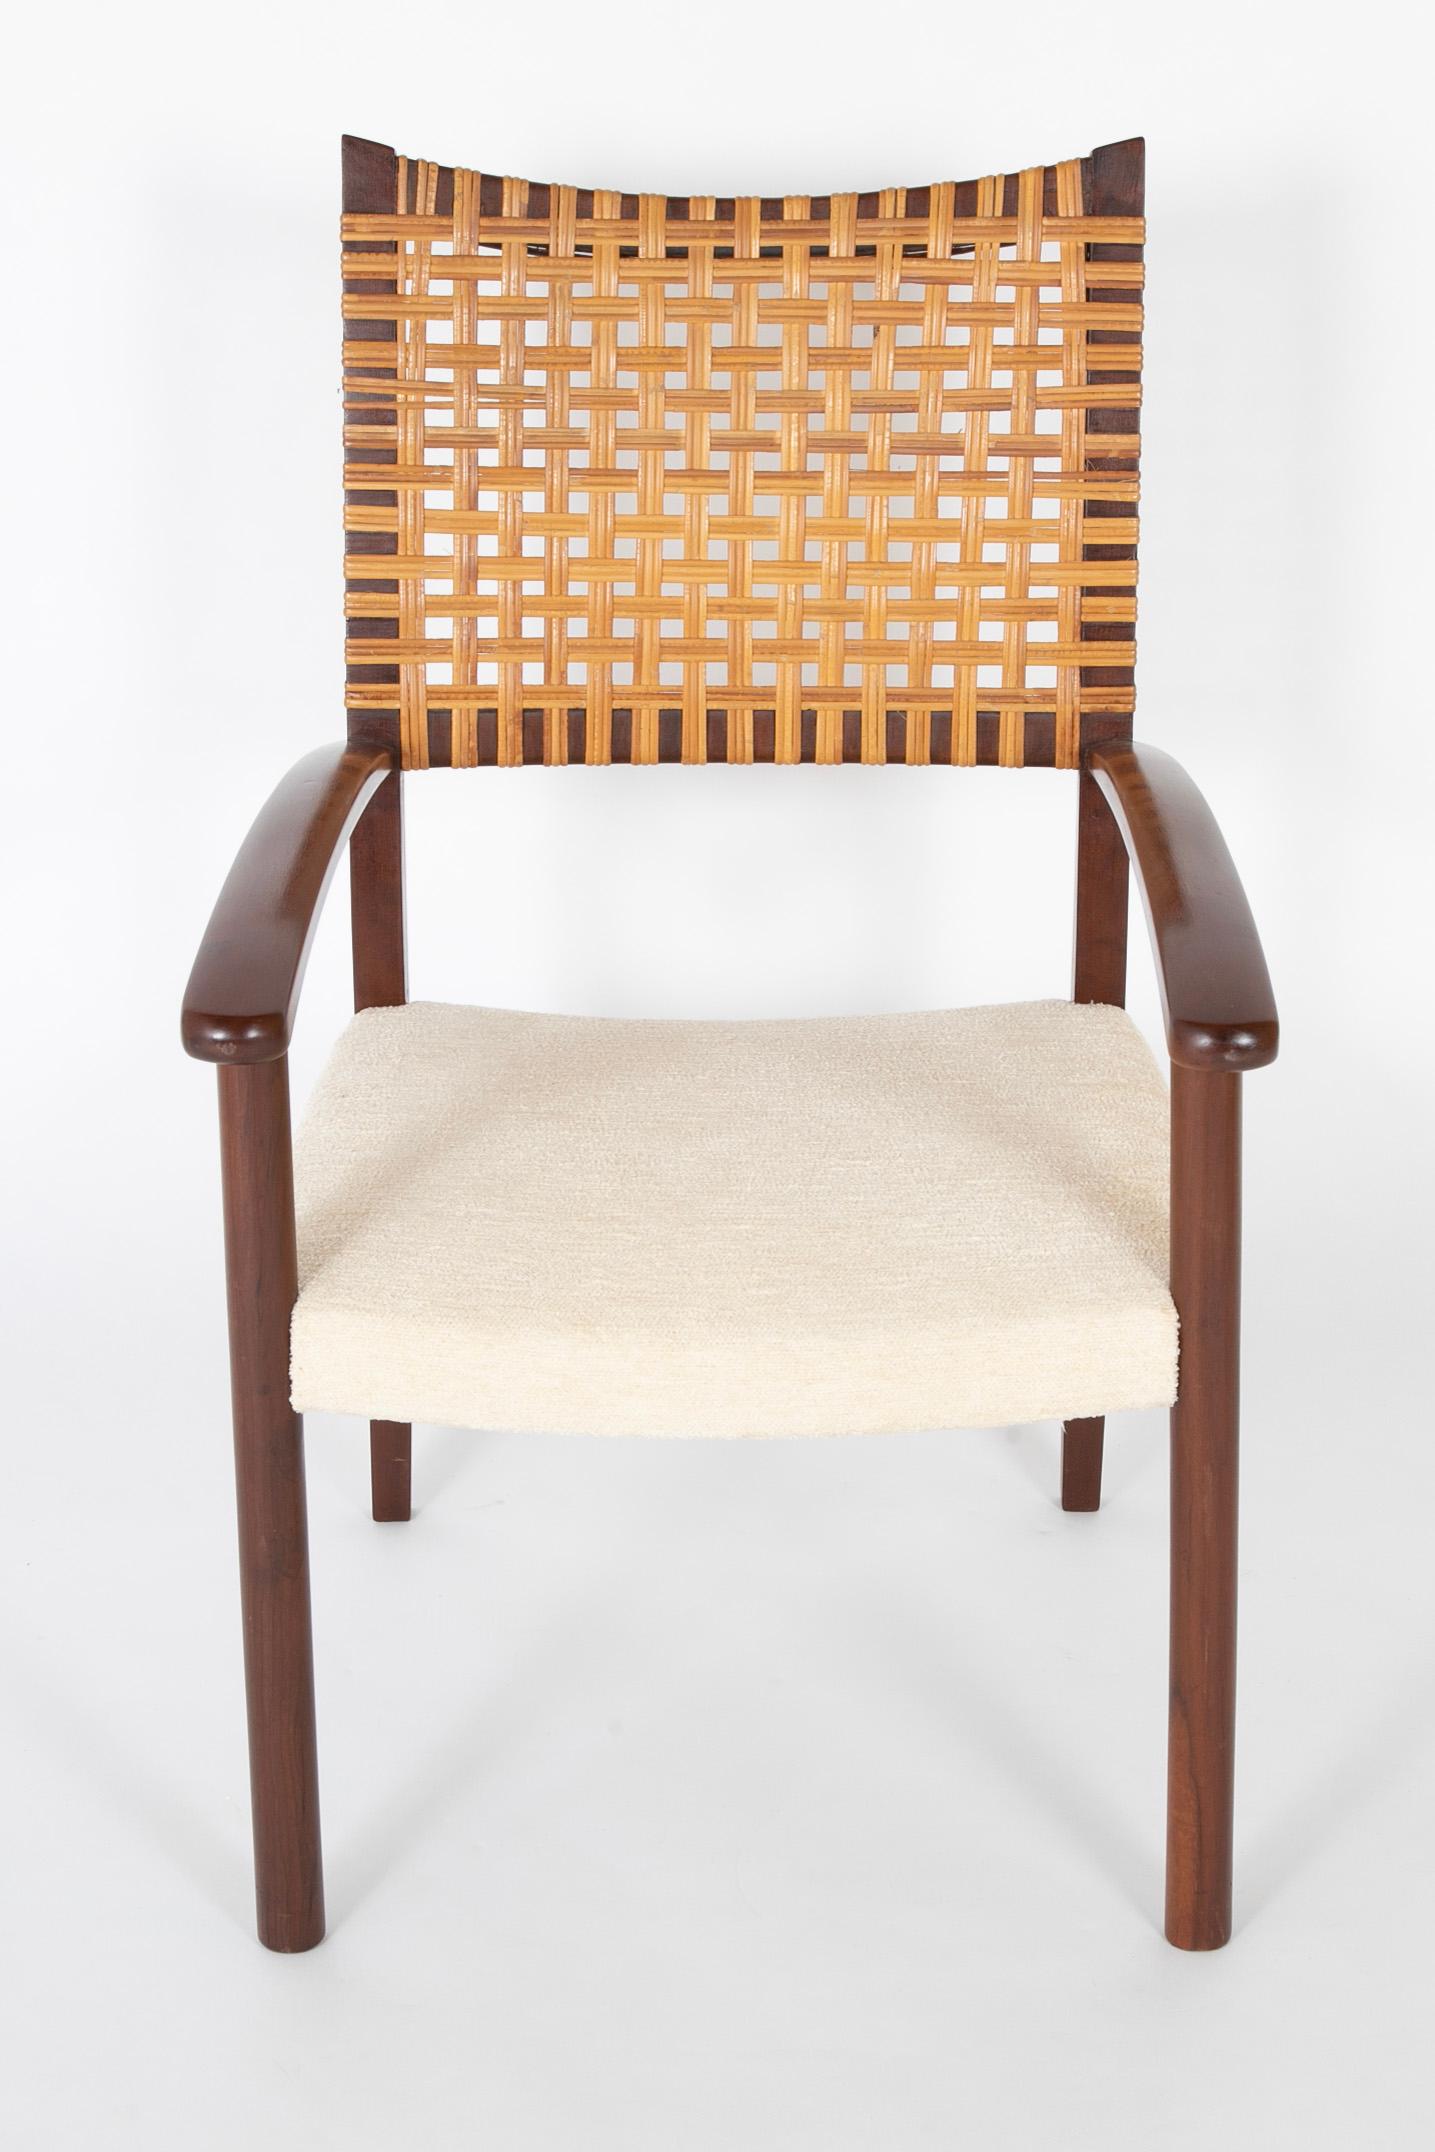 Brazilian Pair of Open Arm Chairs with Caned Backs by Adolfo Foltas For Sale